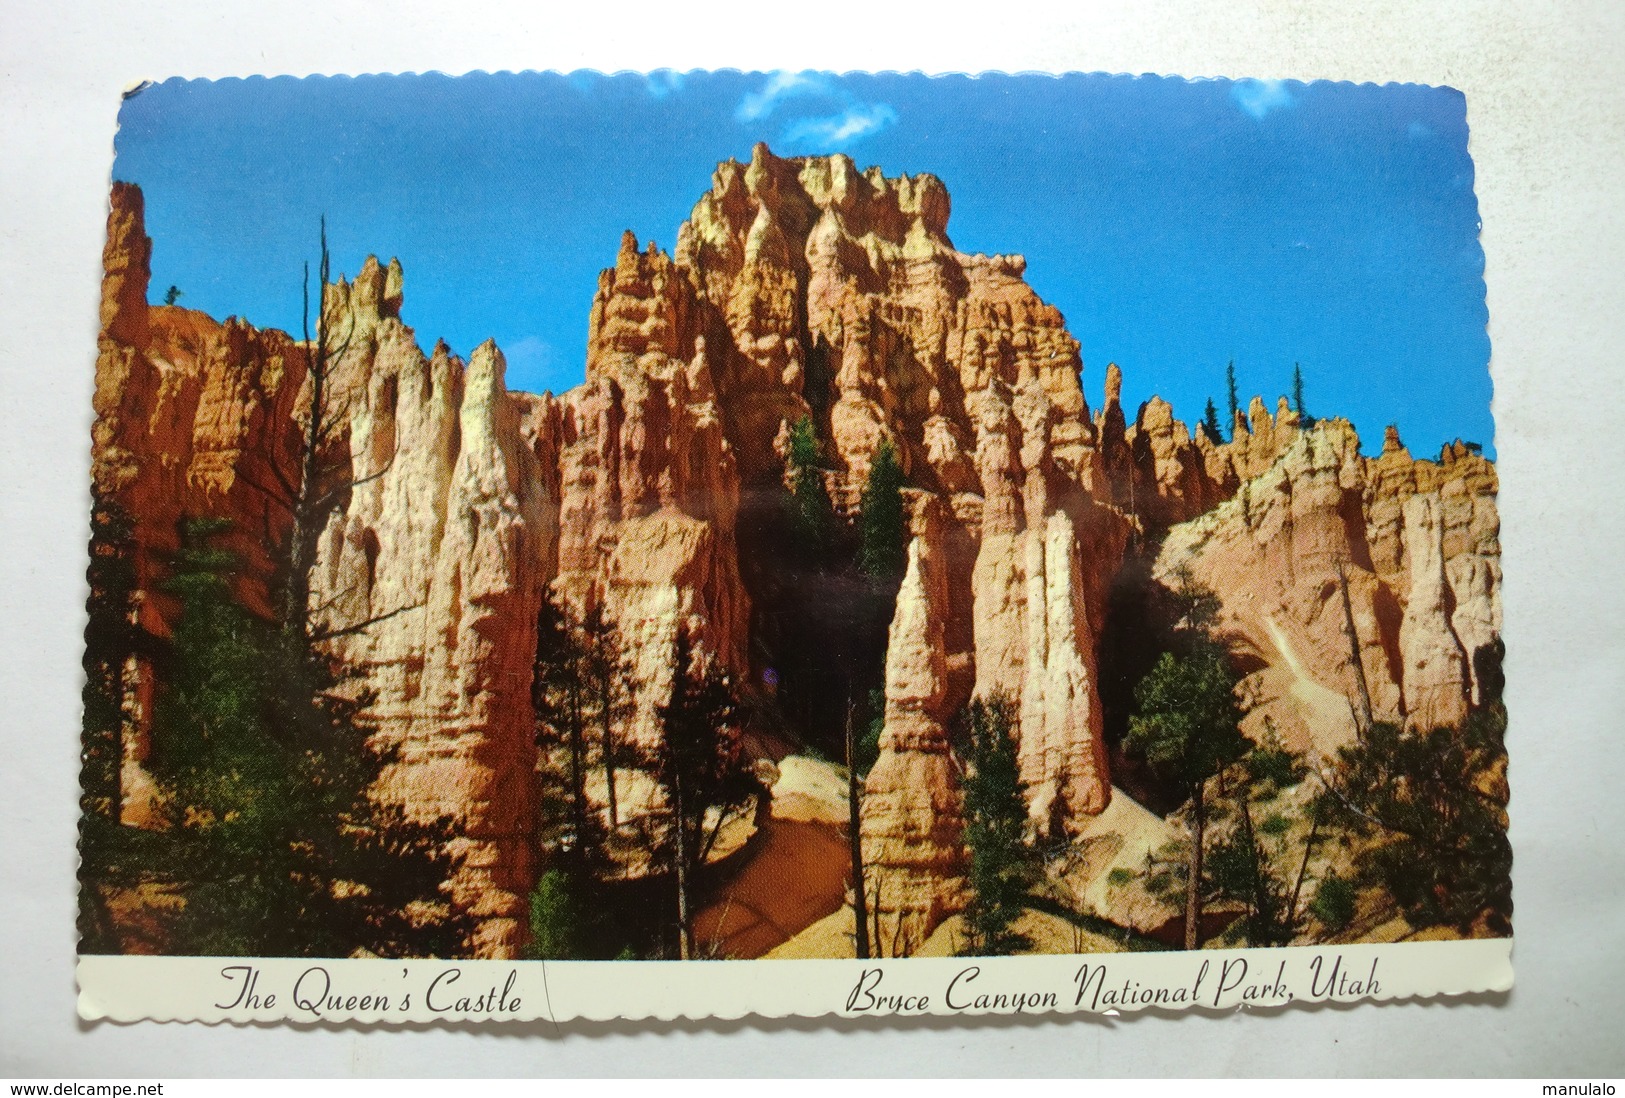 The Queen's Castle - Bryce Canyon National Park, Utah - Bryce Canyon